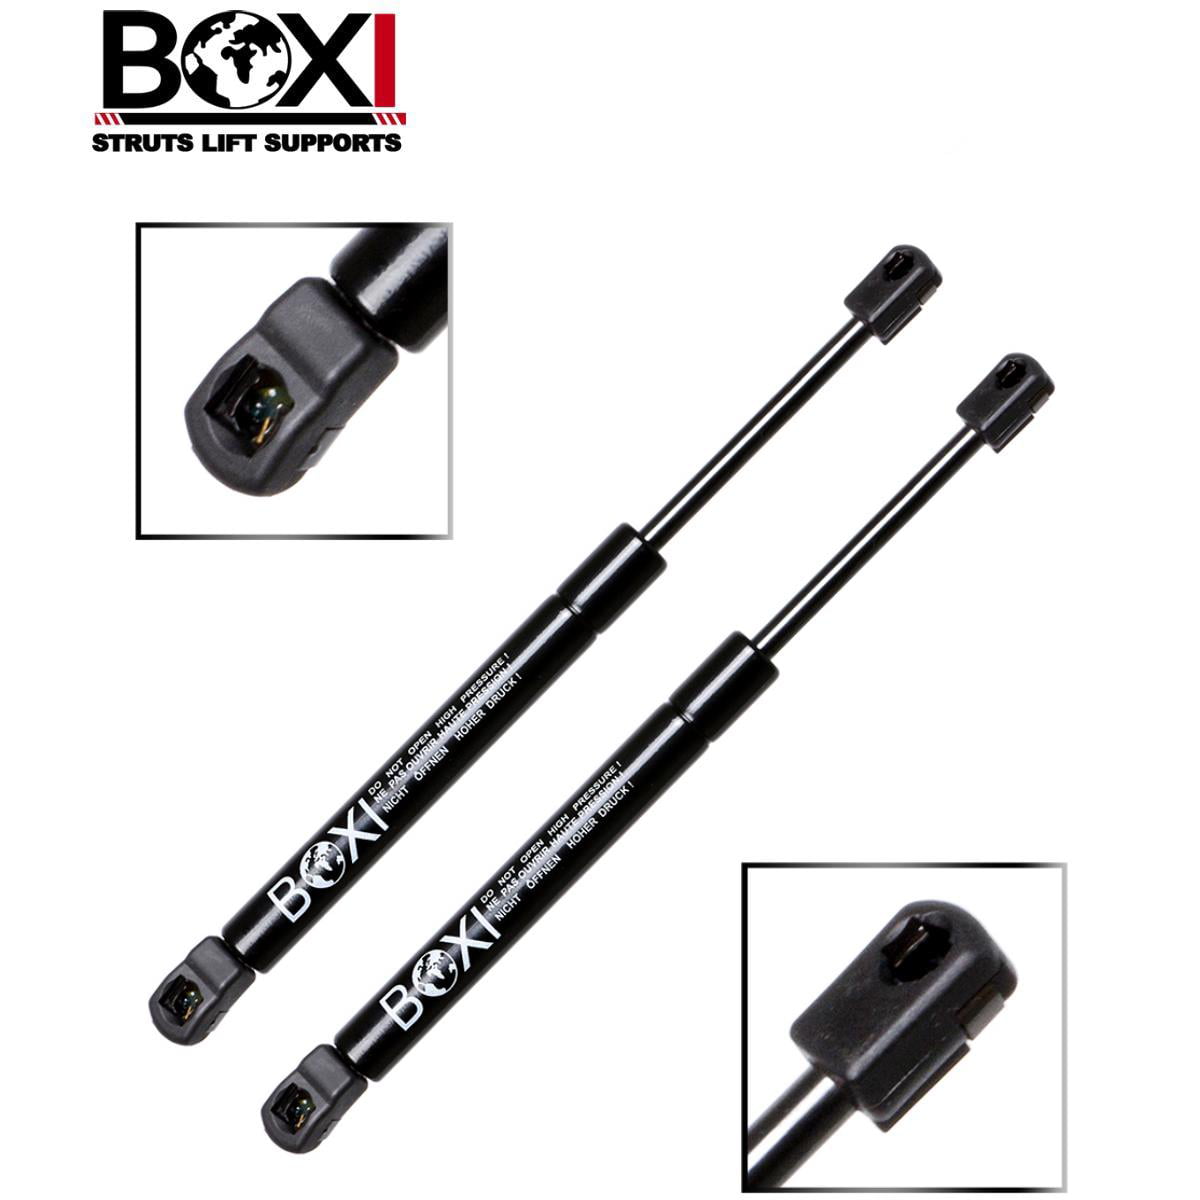 A-Preimum Hood Lift Supports Shock Struts for Ford Explorer Mercury Mountaineer 1997-2001 2-PC Set